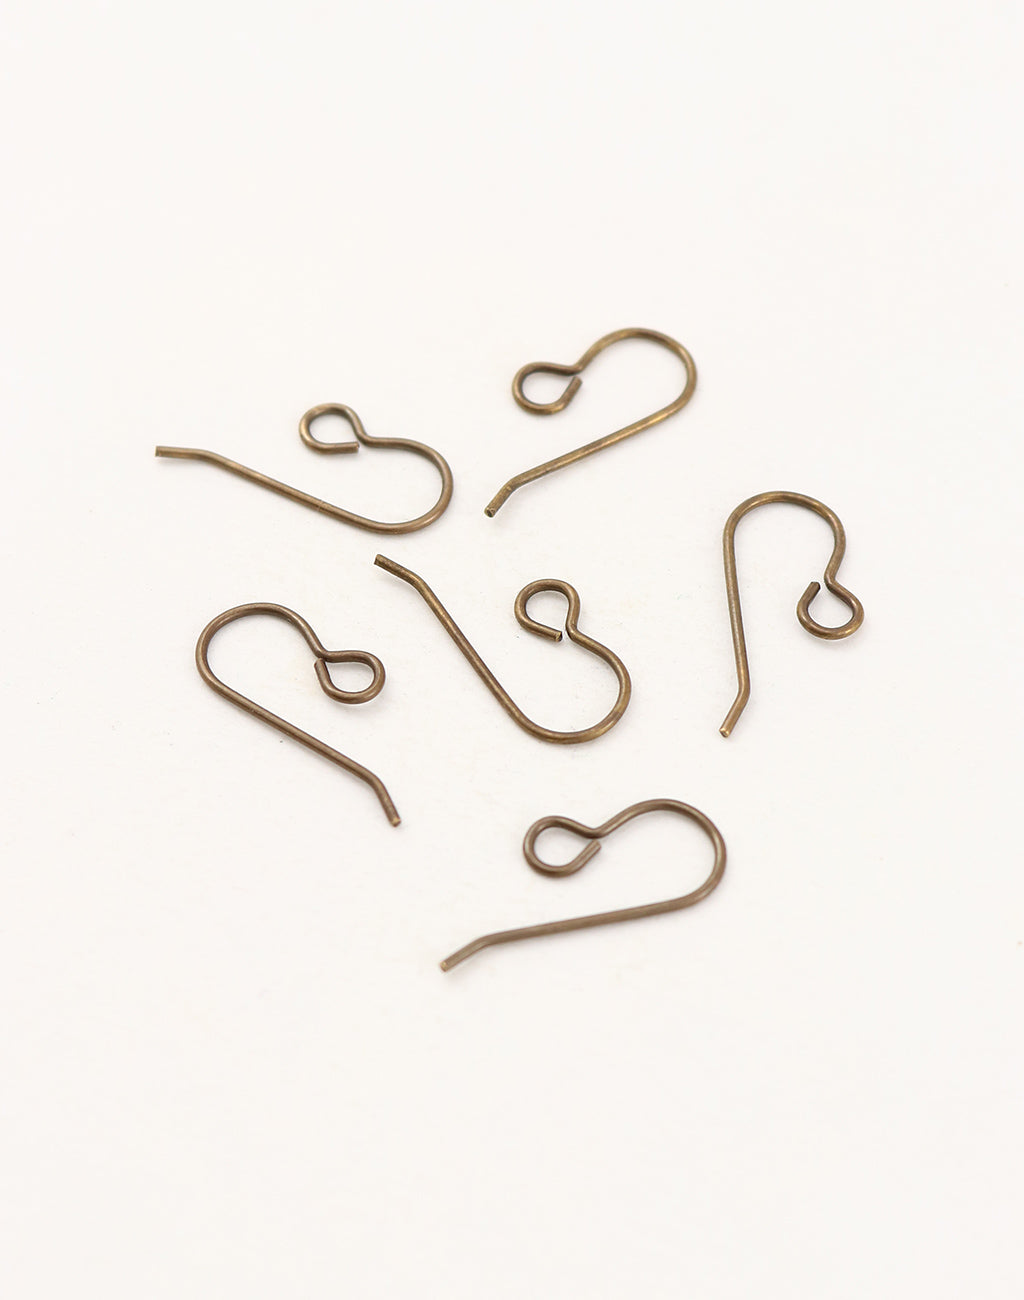 Shop PandaHall Elite 50 pcs Brass Clip-on Earring Hooks Components Silver  for Non-Pierced Ears for Jewelry Making - PandaHall Selected